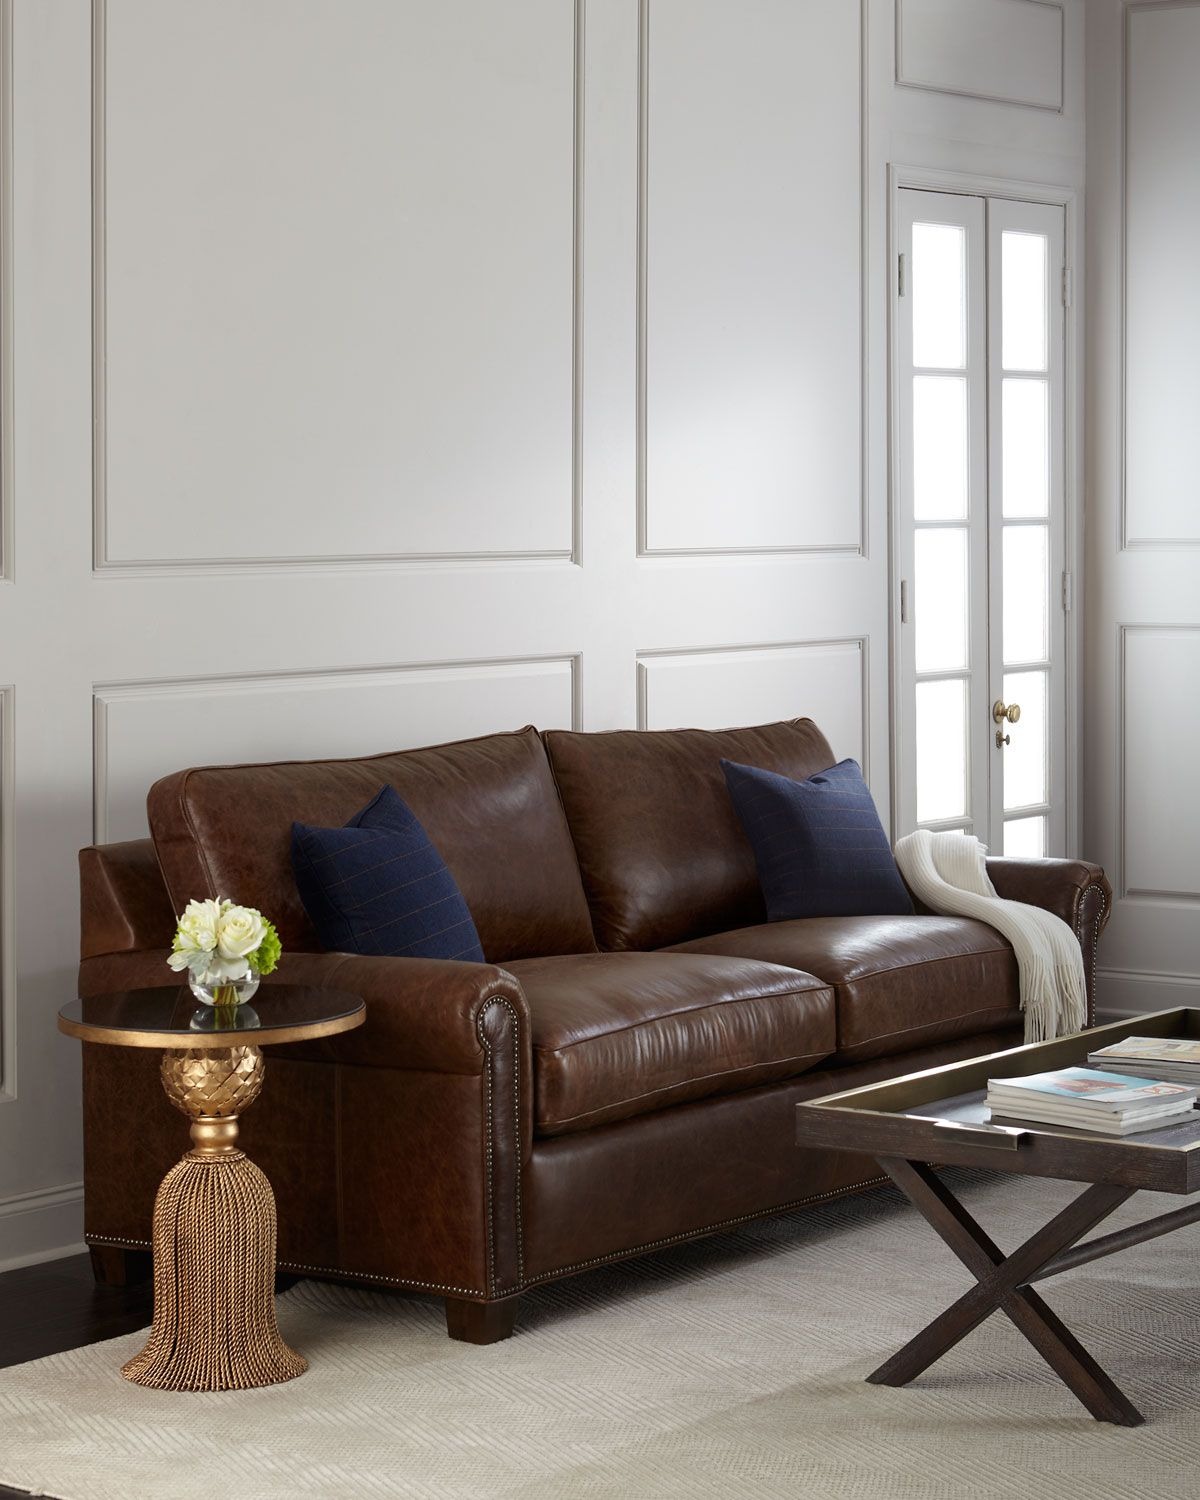 Leatherette Upholstery for An Attractive Sofa